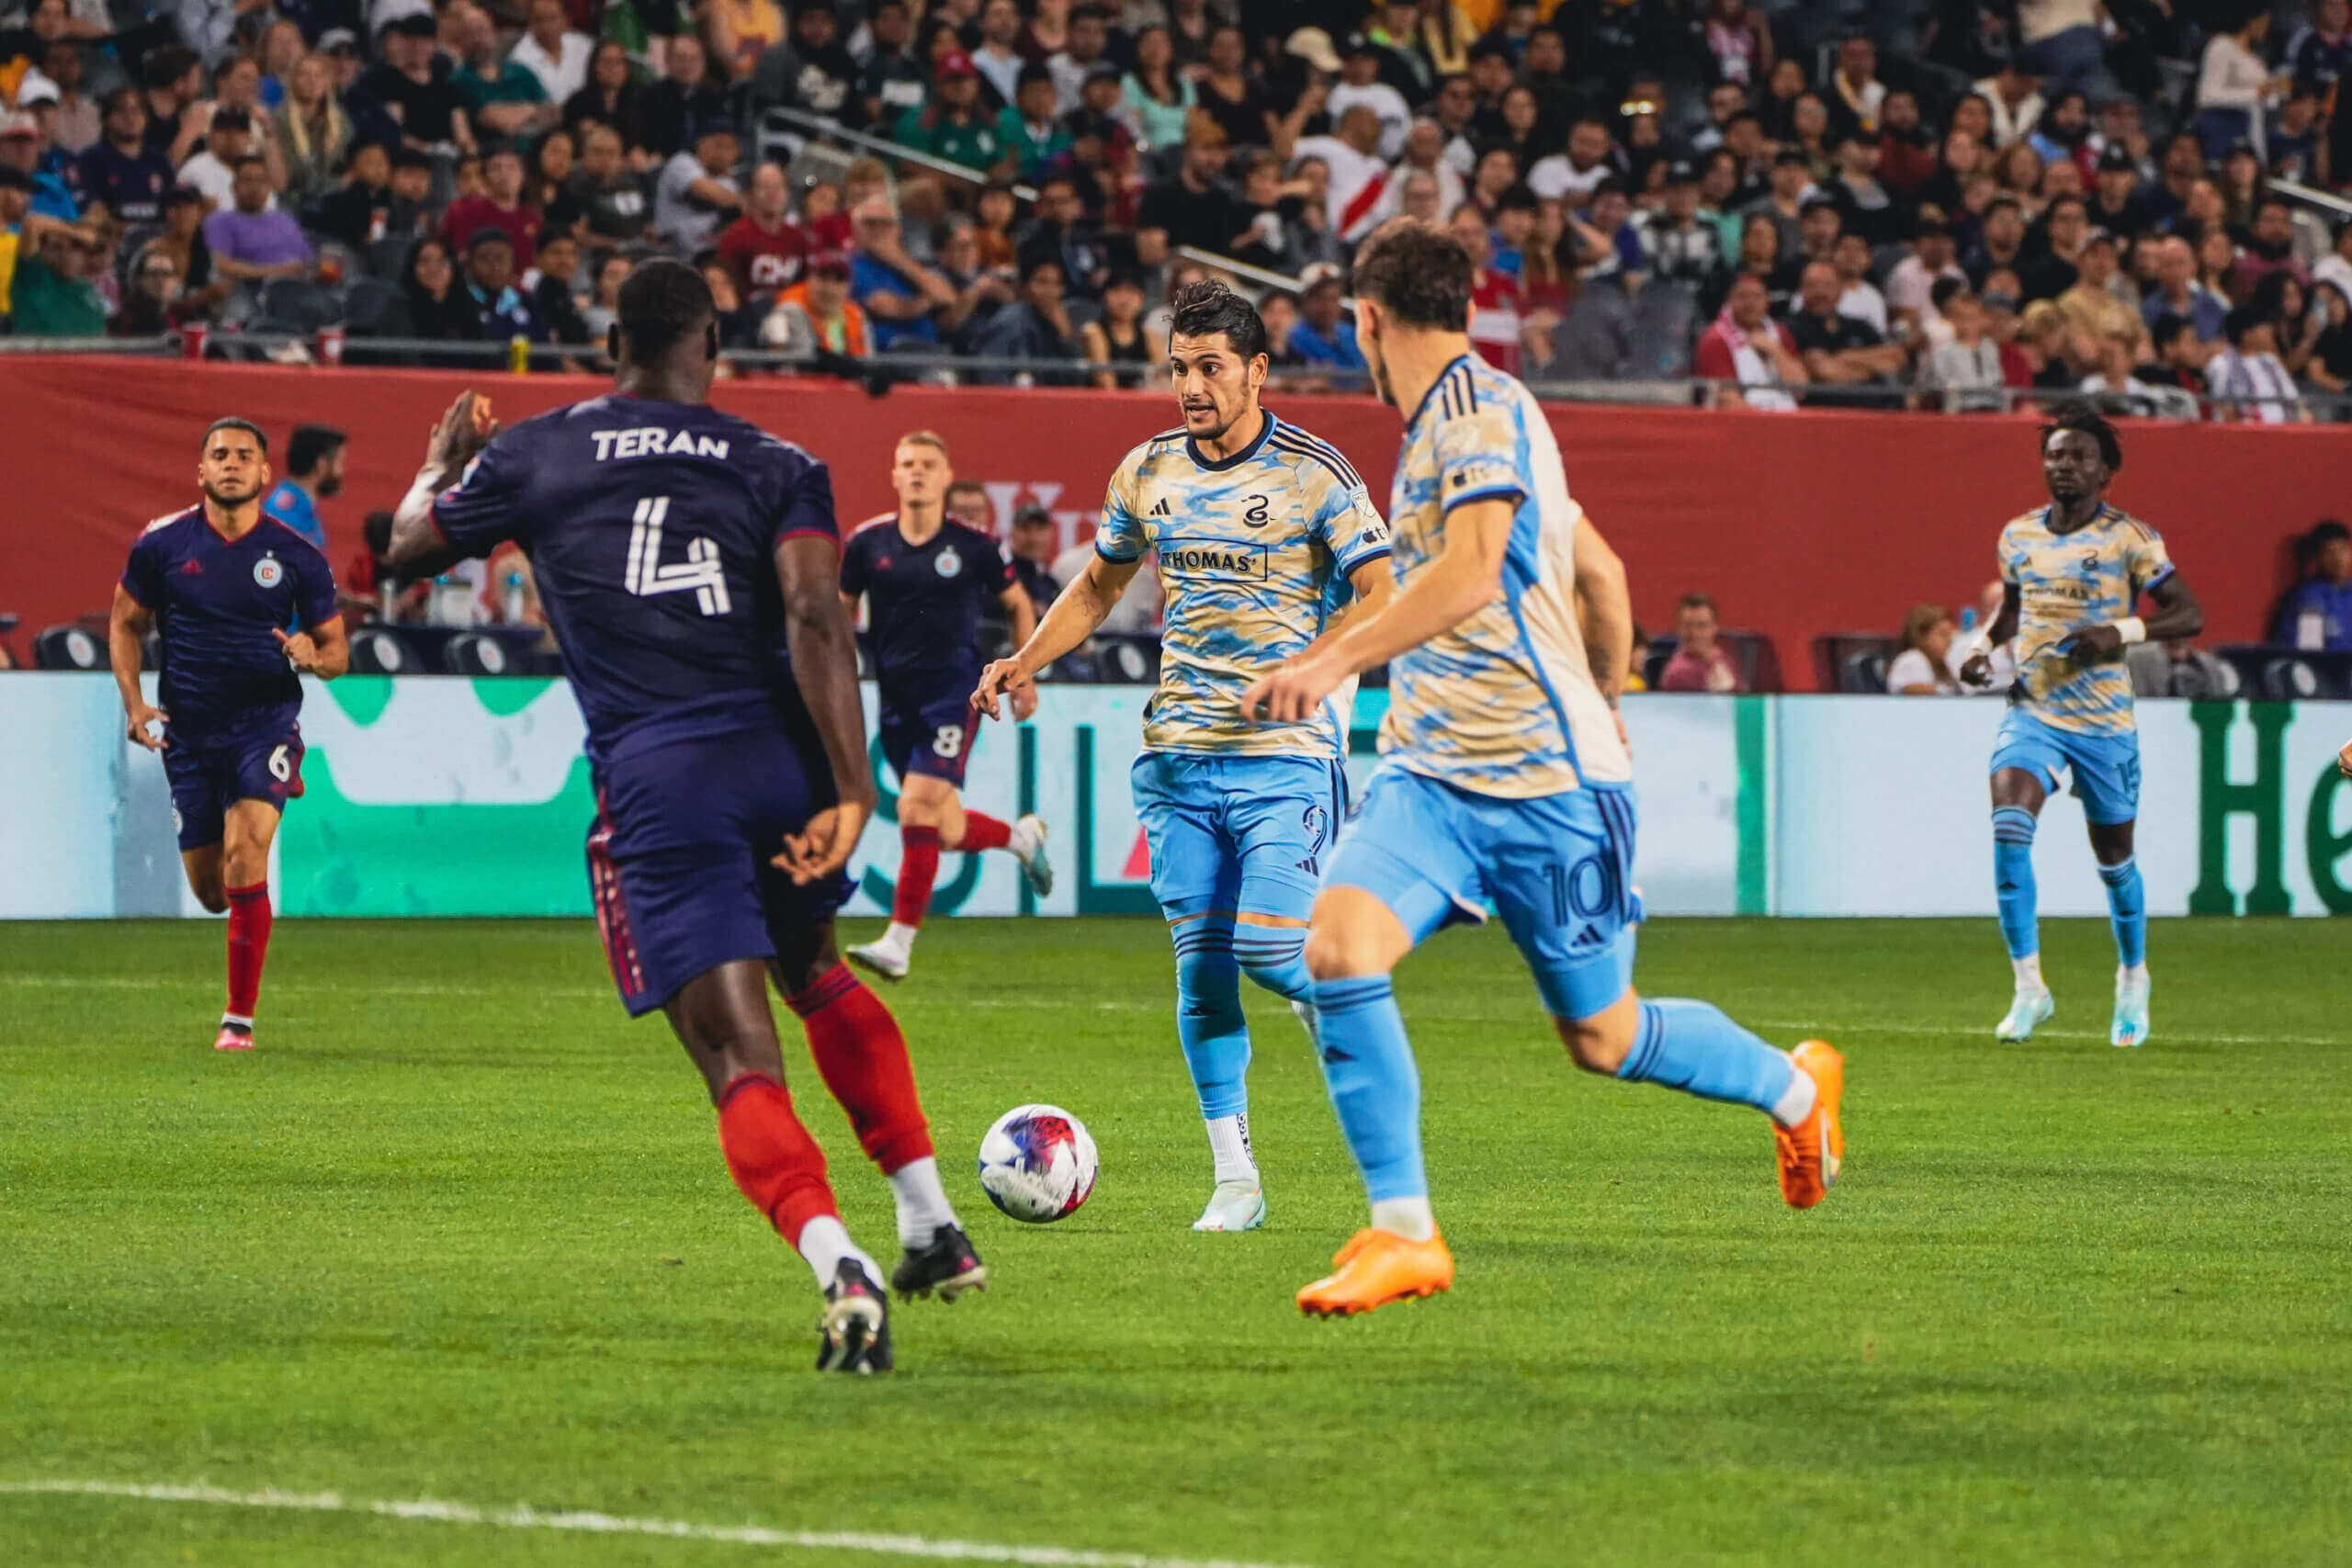 Union Storm Back from Two-goal Deficit, Draw with Chicago Fire 2-2